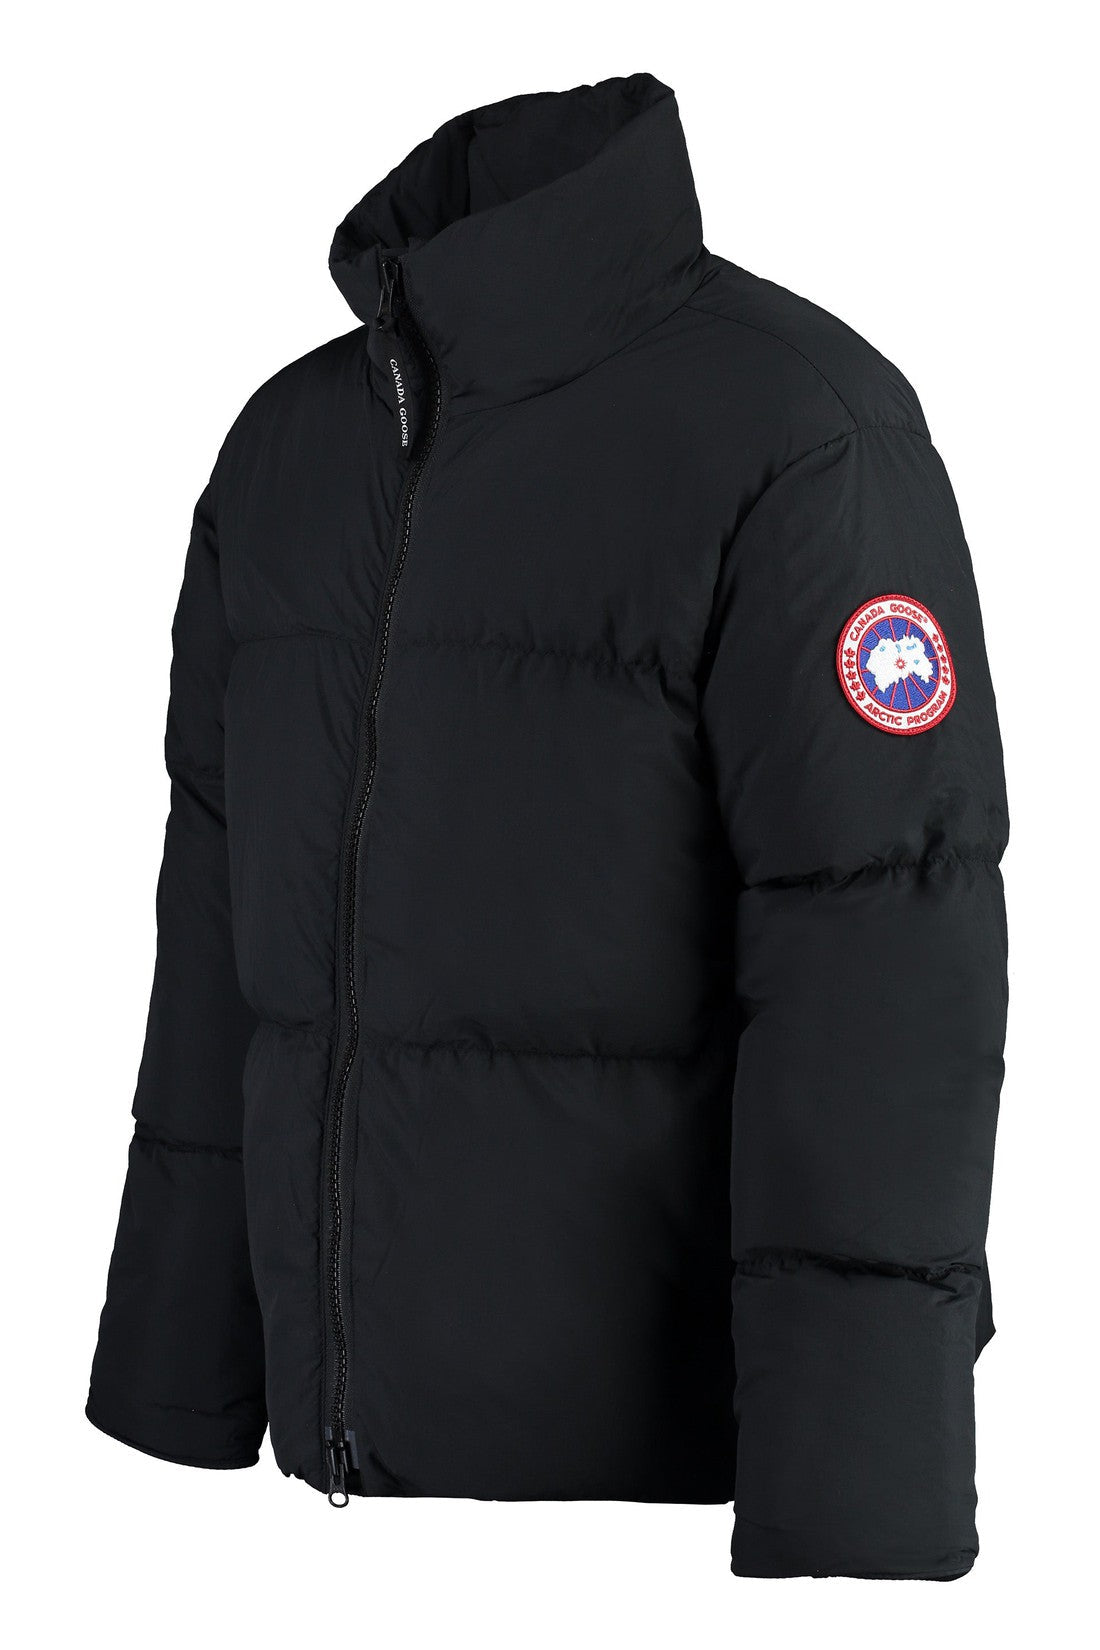 Canada Goose-OUTLET-SALE-Lawrence hooded nylon down jacket-ARCHIVIST